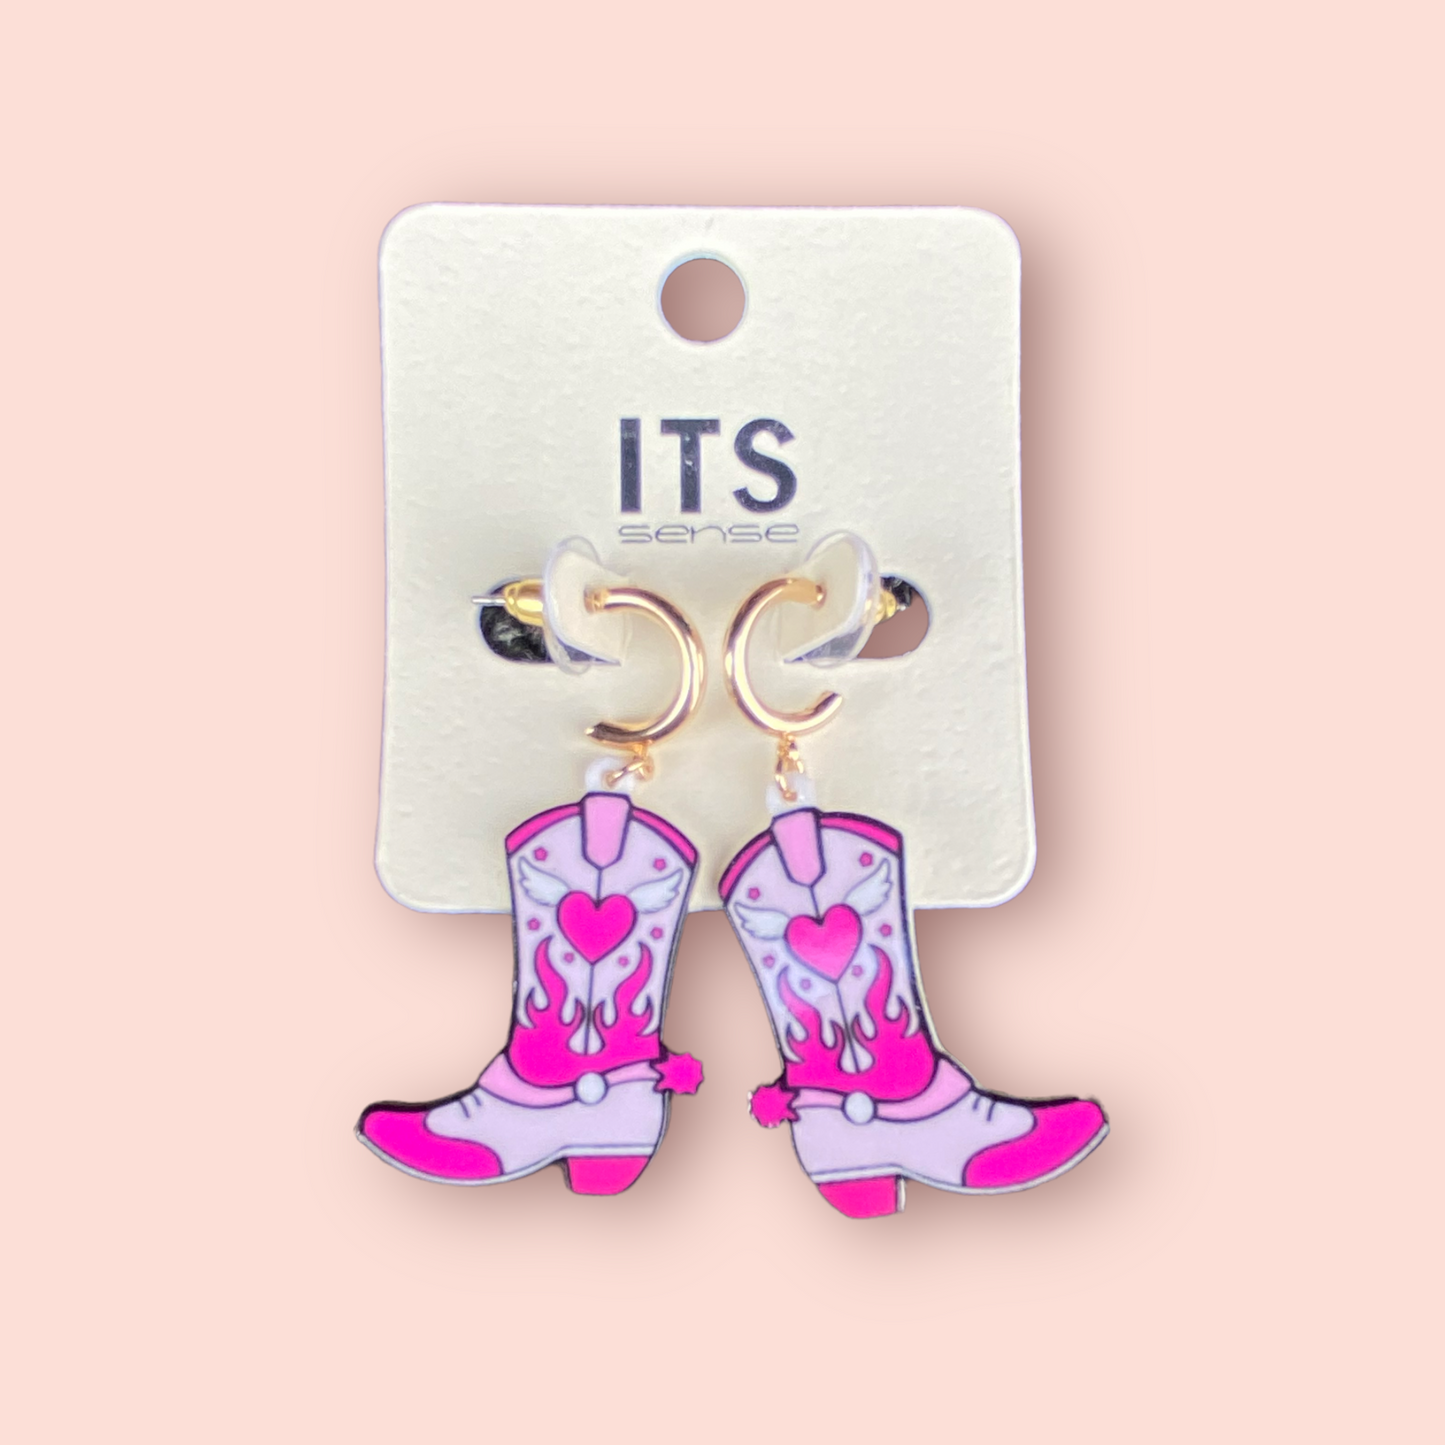 Cowboy Boot with Spurs and Hoop Earrings